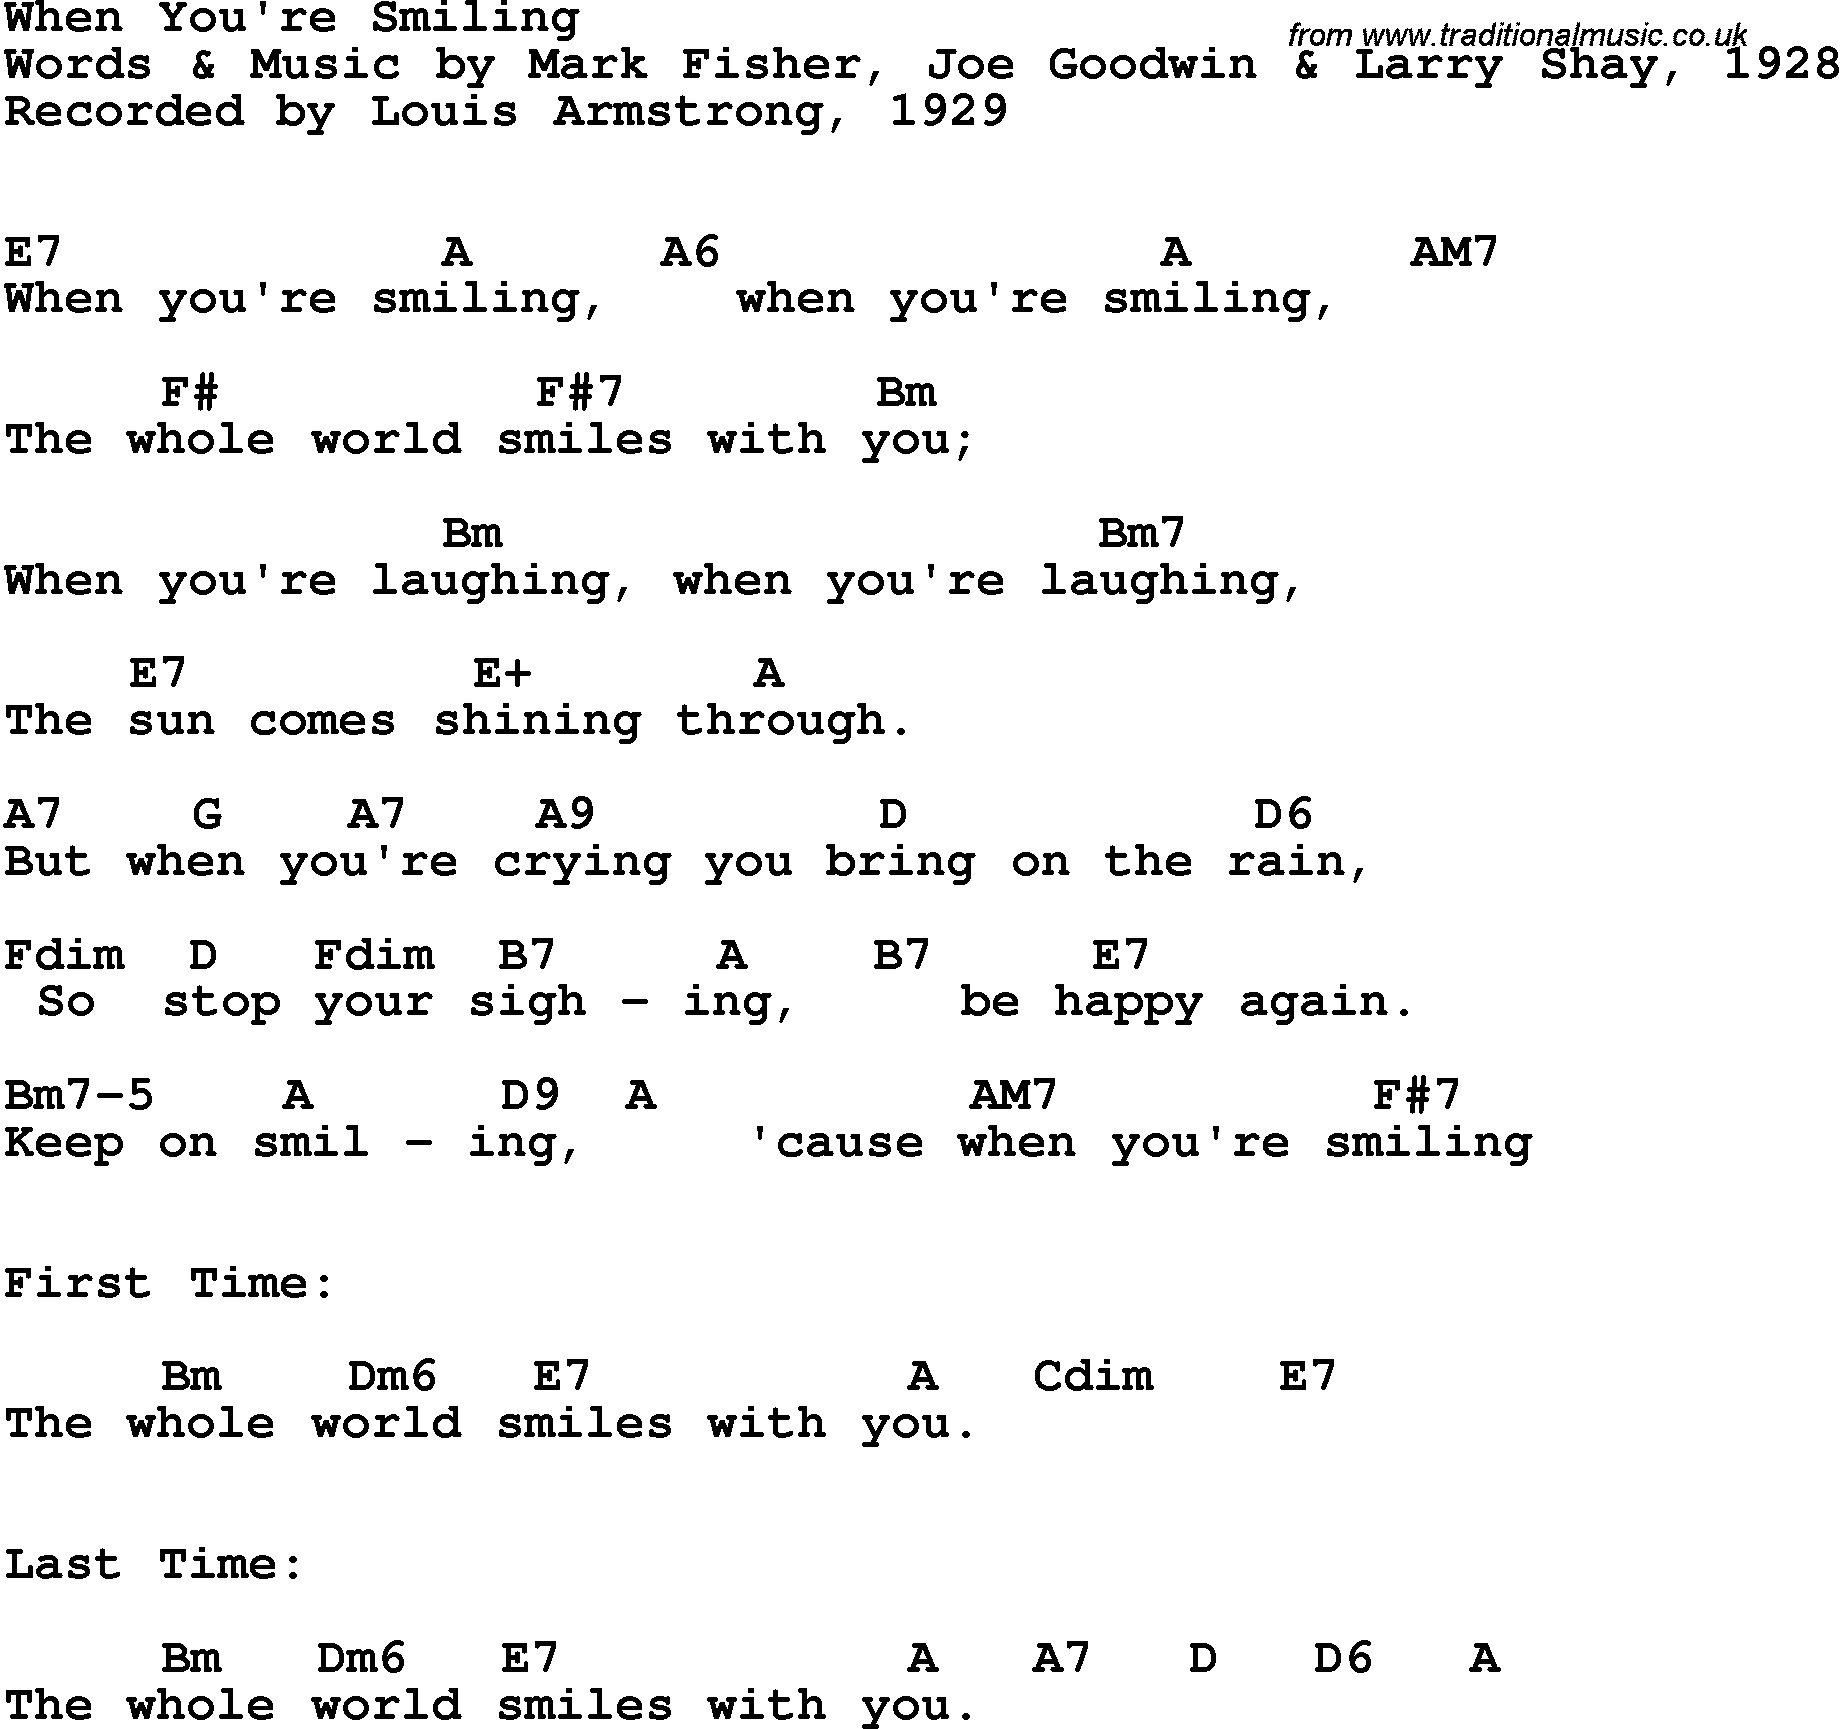 Song Lyrics with guitar chords for When You're Smiling - Louis Armstrong, 1929